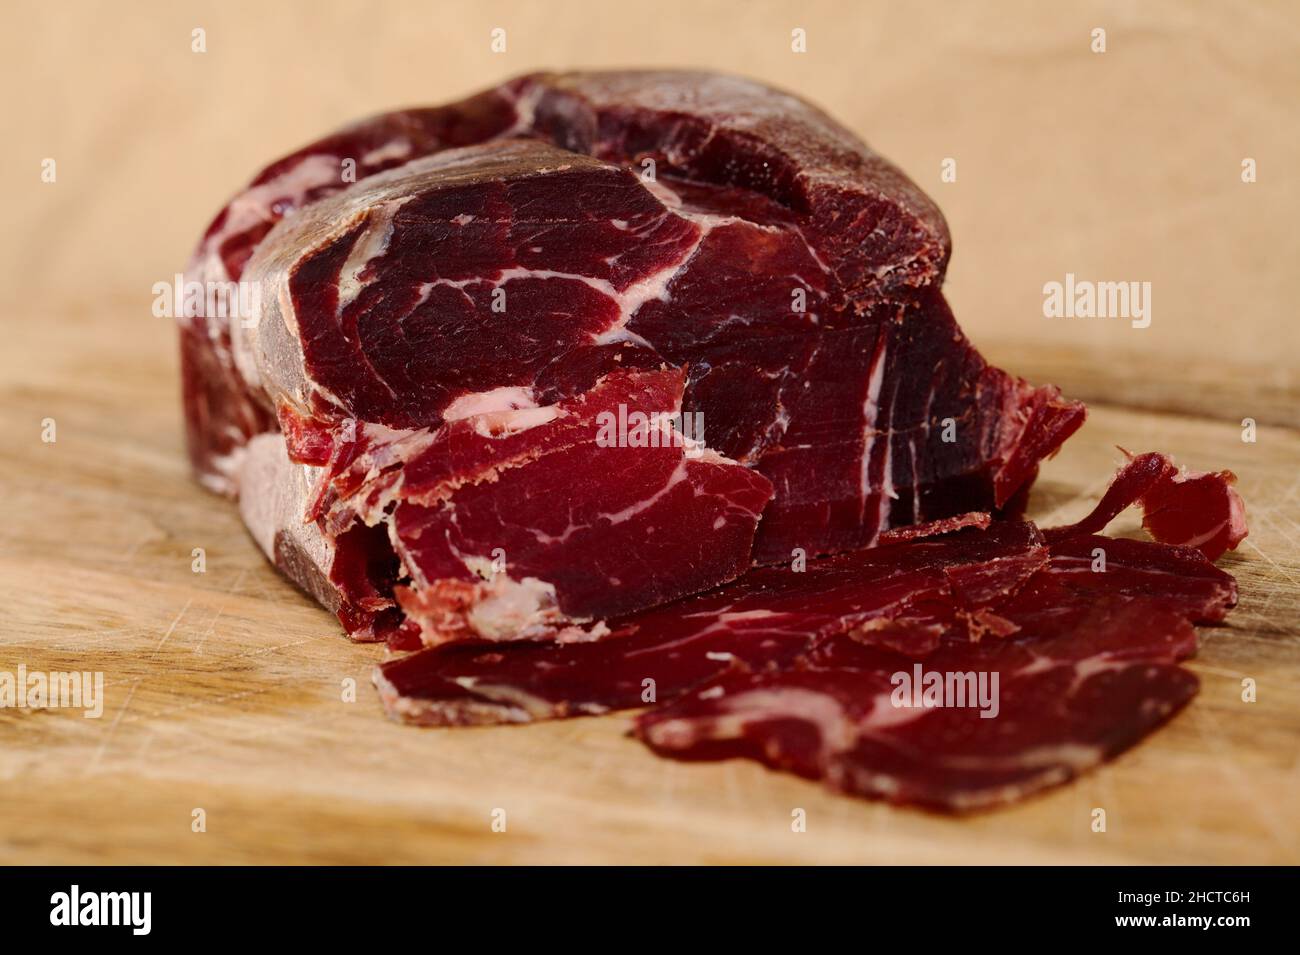 Cecina de Leon, salted and air dried beef from Leon province, local speciality Stock Photo